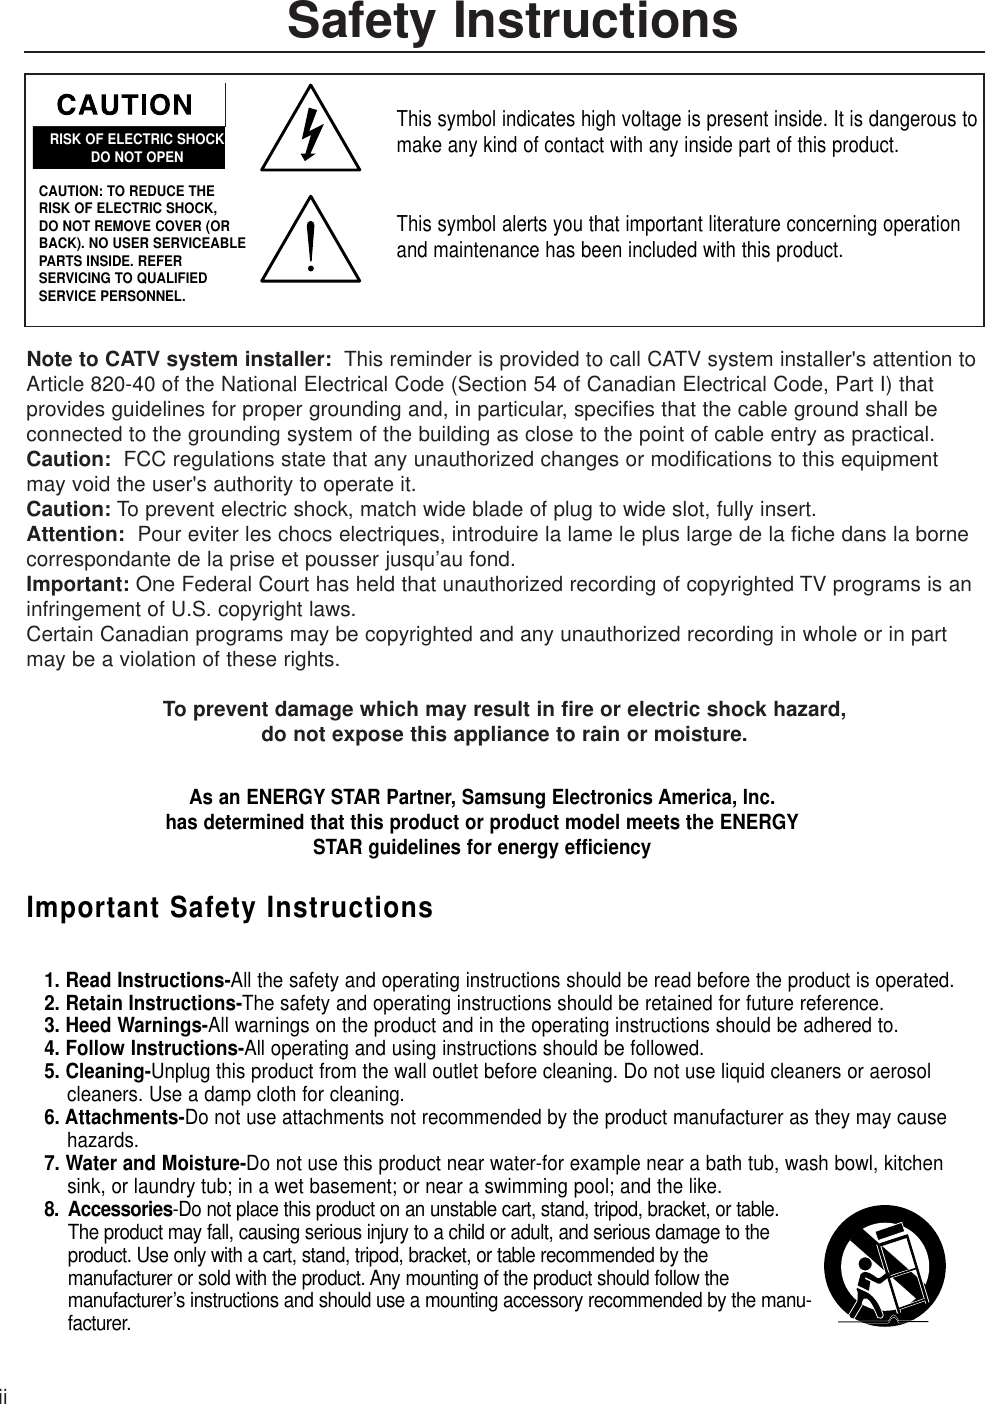 Safety InstructionsiiNote to CATV system installer:  This reminder is provided to call CATV system installer&apos;s attention toArticle 820-40 of the National Electrical Code (Section 54 of Canadian Electrical Code, Part I) that provides guidelines for proper grounding and, in particular, specifies that the cable ground shall beconnected to the grounding system of the building as close to the point of cable entry as practical.          Caution: FCC regulations state that any unauthorized changes or modifications to this equipmentmay void the user&apos;s authority to operate it.     Caution: To prevent electric shock, match wide blade of plug to wide slot, fully insert.Attention: Pour eviter les chocs electriques, introduire la lame le plus large de la fiche dans la borne correspondante de la prise et pousser jusqu’au fond.Important: One Federal Court has held that unauthorized recording of copyrighted TV programs is aninfringement of U.S. copyright laws.Certain Canadian programs may be copyrighted and any unauthorized recording in whole or in partmay be a violation of these rights.To prevent damage which may result in fire or electric shock hazard, do not expose this appliance to rain or moisture.RISK OF ELECTRIC SHOCKDO NOT OPENCAUTION: TO REDUCE THE RISK OF ELECTRIC SHOCK, DO NOT REMOVE COVER (ORBACK). NO USER SERVICEABLEPARTS INSIDE. REFER SERVICING TO QUALIFIED SERVICE PERSONNEL.This symbol indicates high voltage is present inside. It is dangerous tomake any kind of contact with any inside part of this product.This symbol alerts you that important literature concerning operationand maintenance has been included with this product.As an ENERGY STAR Partner, Samsung Electronics America, Inc.has determined that this product or product model meets the ENERGYSTAR guidelines for energy efficiencyImportant Safety Instructions1. Read Instructions-All the safety and operating instructions should be read before the product is operated.2. Retain Instructions-The safety and operating instructions should be retained for future reference.3. Heed Warnings-All warnings on the product and in the operating instructions should be adhered to.4. Follow Instructions-All operating and using instructions should be followed.5. Cleaning-Unplug this product from the wall outlet before cleaning. Do not use liquid cleaners or aerosol cleaners. Use a damp cloth for cleaning.6. Attachments-Do not use attachments not recommended by the product manufacturer as they may cause hazards.7. Water and Moisture-Do not use this product near water-for example near a bath tub, wash bowl, kitchen sink, or laundry tub; in a wet basement; or near a swimming pool; and the like.8. Accessories-Do not place this product on an unstable cart, stand, tripod, bracket, or table.The product may fall, causing serious injury to a child or adult, and serious damage to the product. Use only with a cart, stand, tripod, bracket, or table recommended by the manufacturer or sold with the product. Any mounting of the product should follow the manufacturer’s instructions and should use a mounting accessory recommended by the manu-facturer.